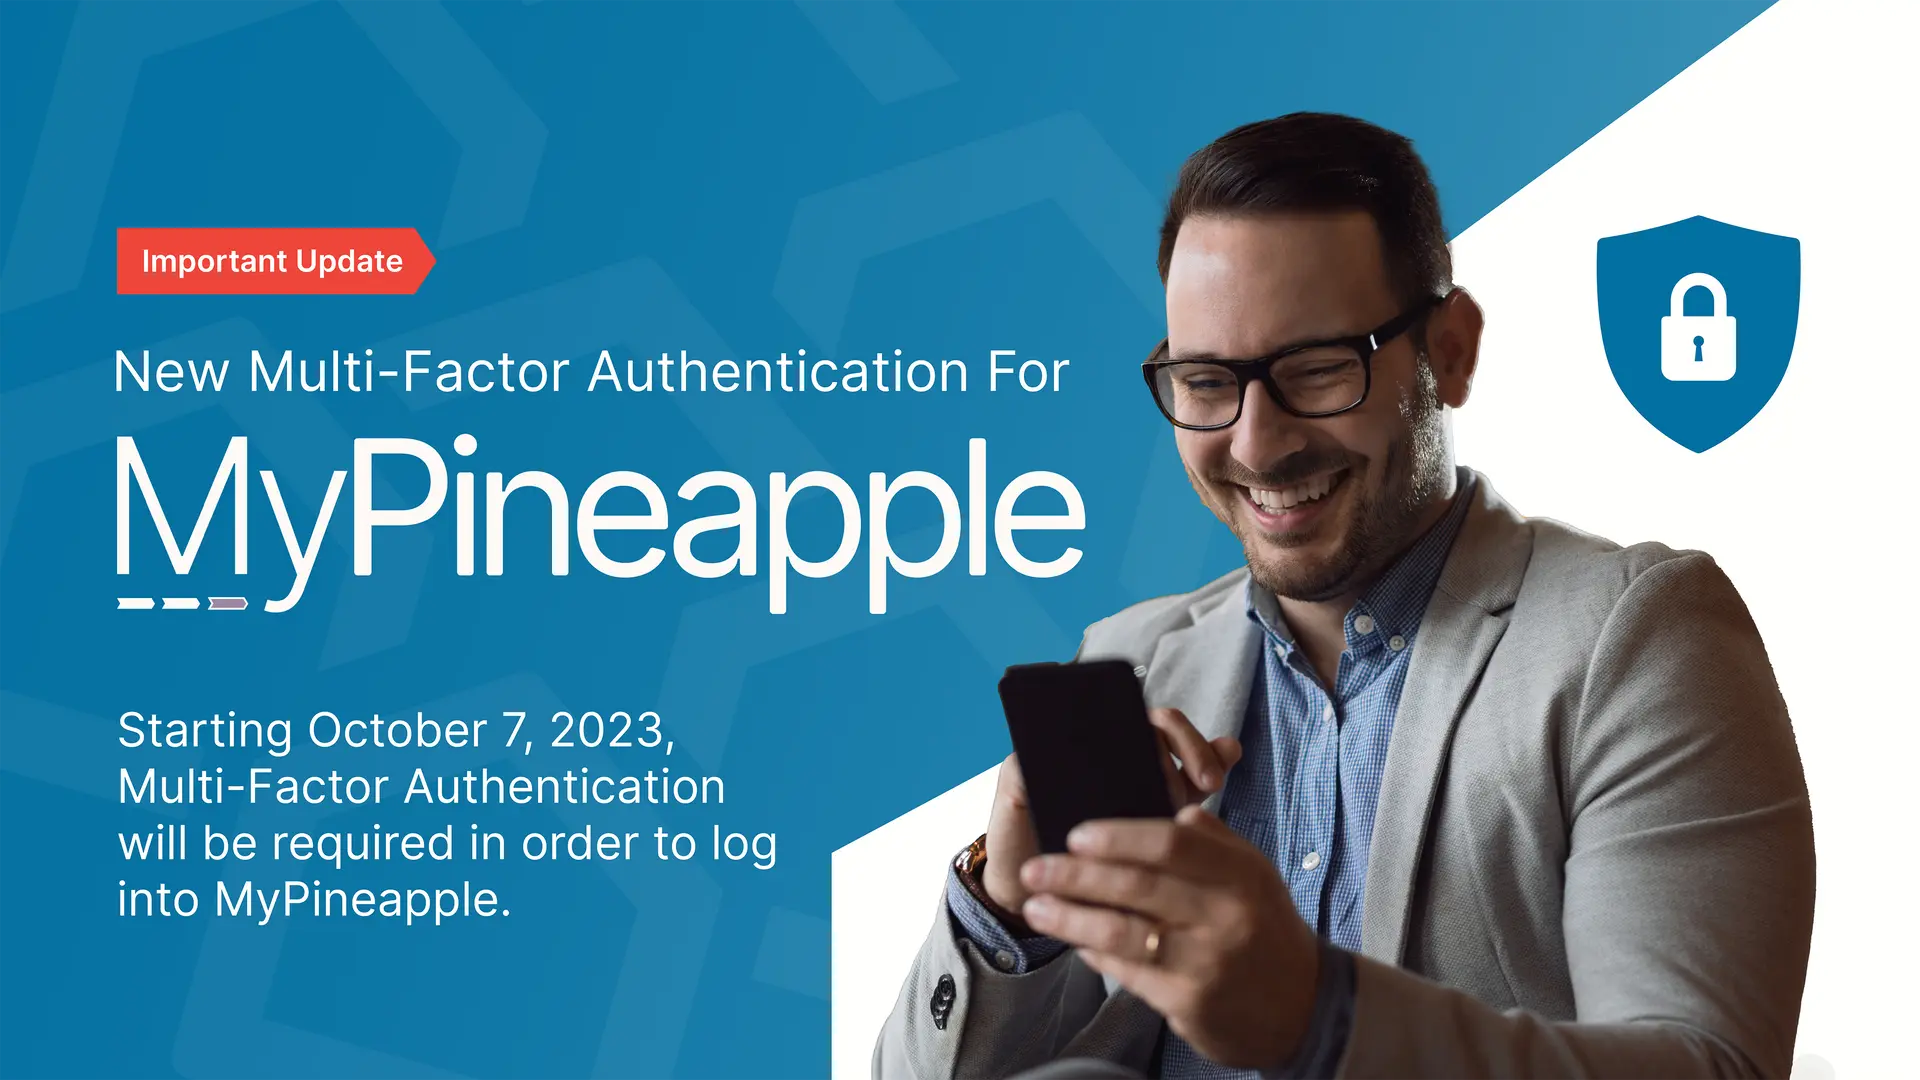 Pineapple Technology Update: Multi-Factor Authentication for MyPineapple Access